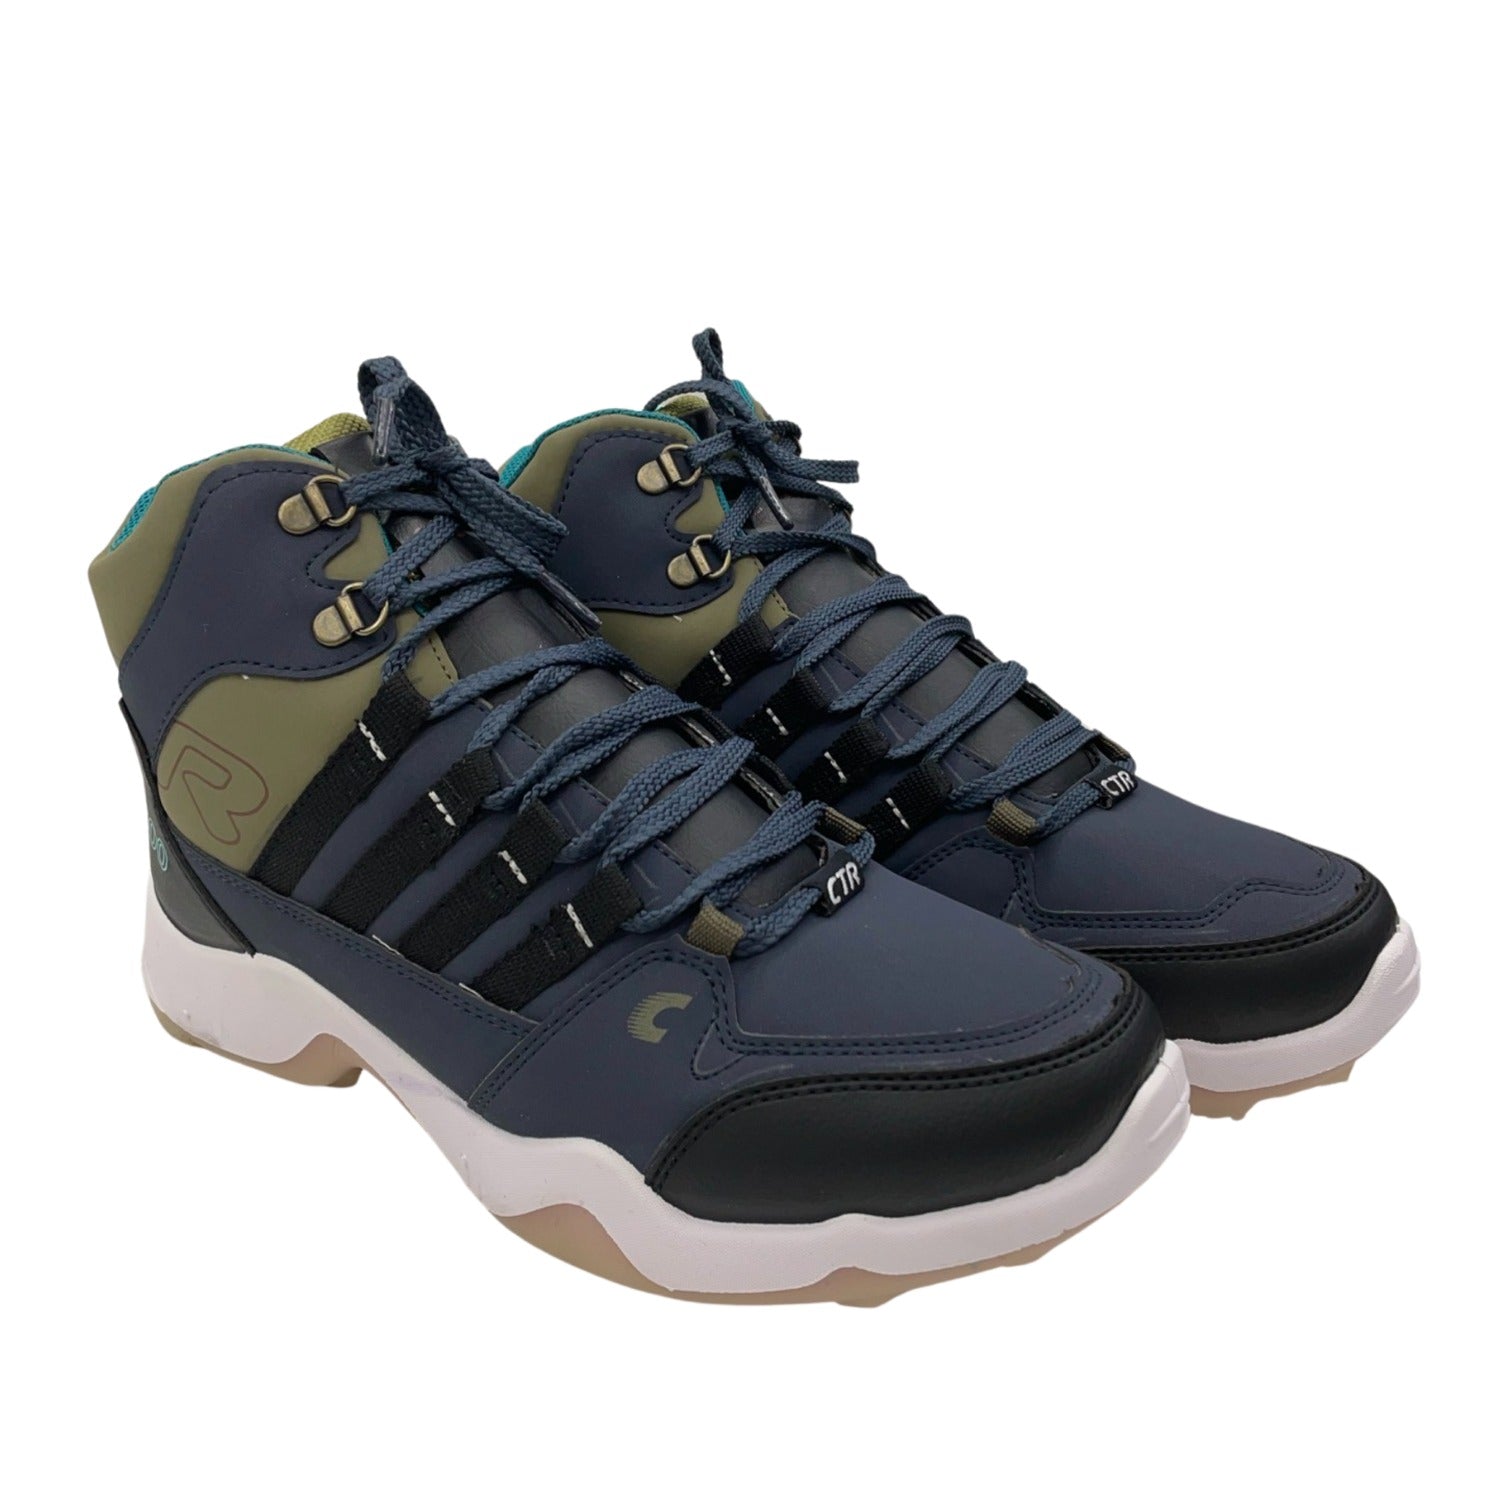 Buy Gokyo Trekking Shoes - Mid Ankle Blue / Brown Blue / Khaki | Trekking & Hiking Shoes at Gokyo Outdoor Clothing & Gear